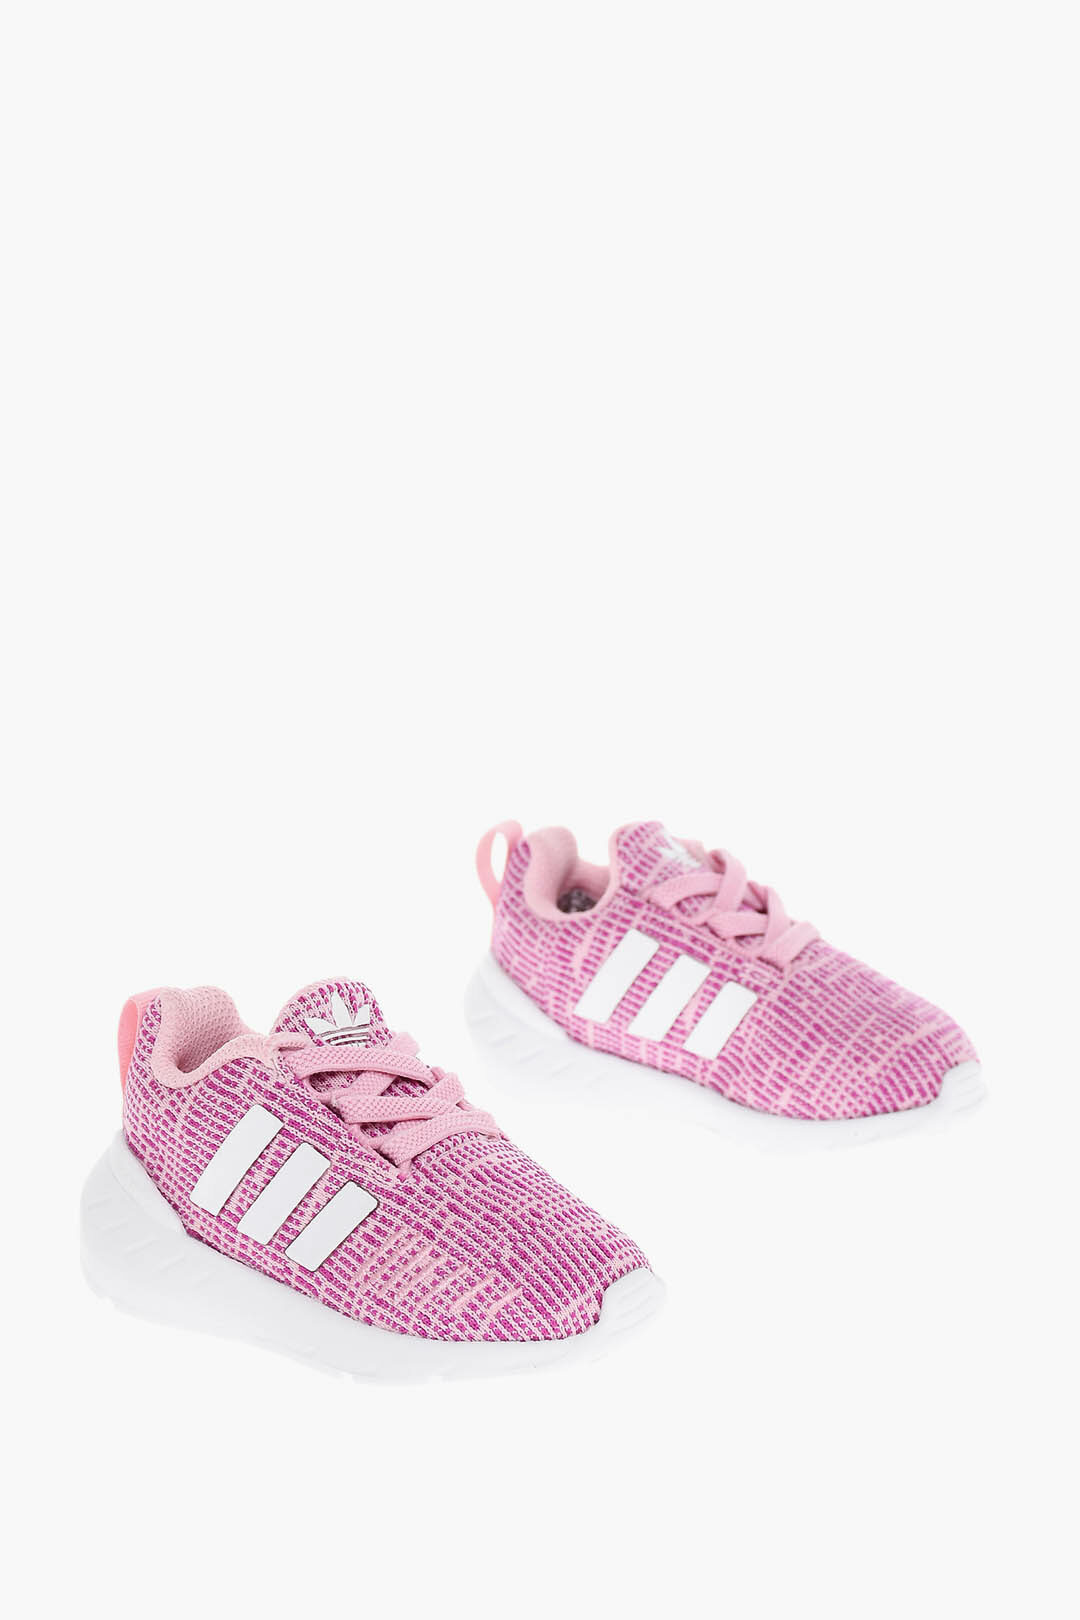 Adidas Kids SWIFT RUN 22 Lace-up Sneakers with Side Stripes - Glamood Outlet